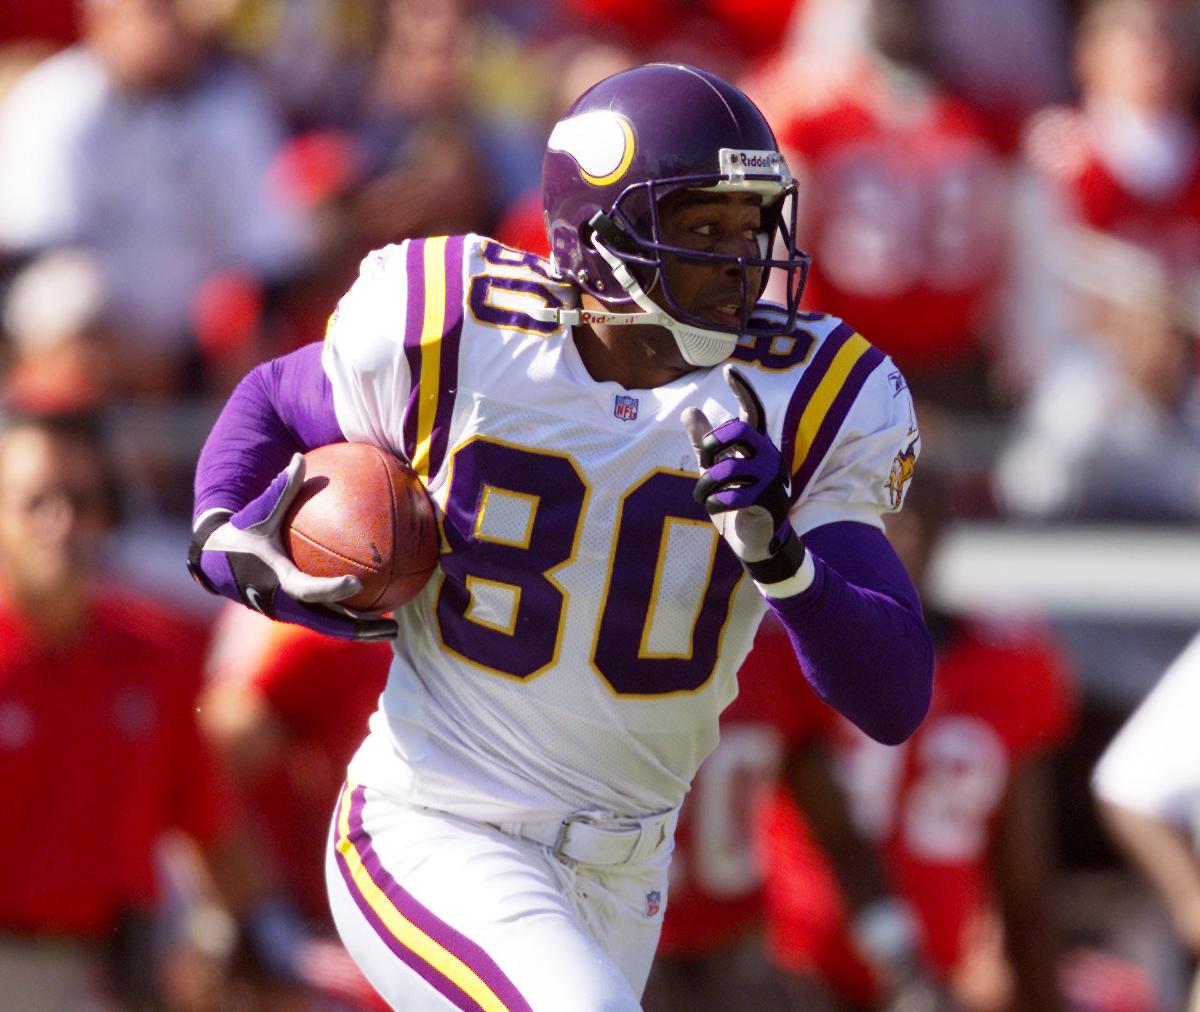 Minnesota Vikings - Cris Carter makes the 1000th catch of his